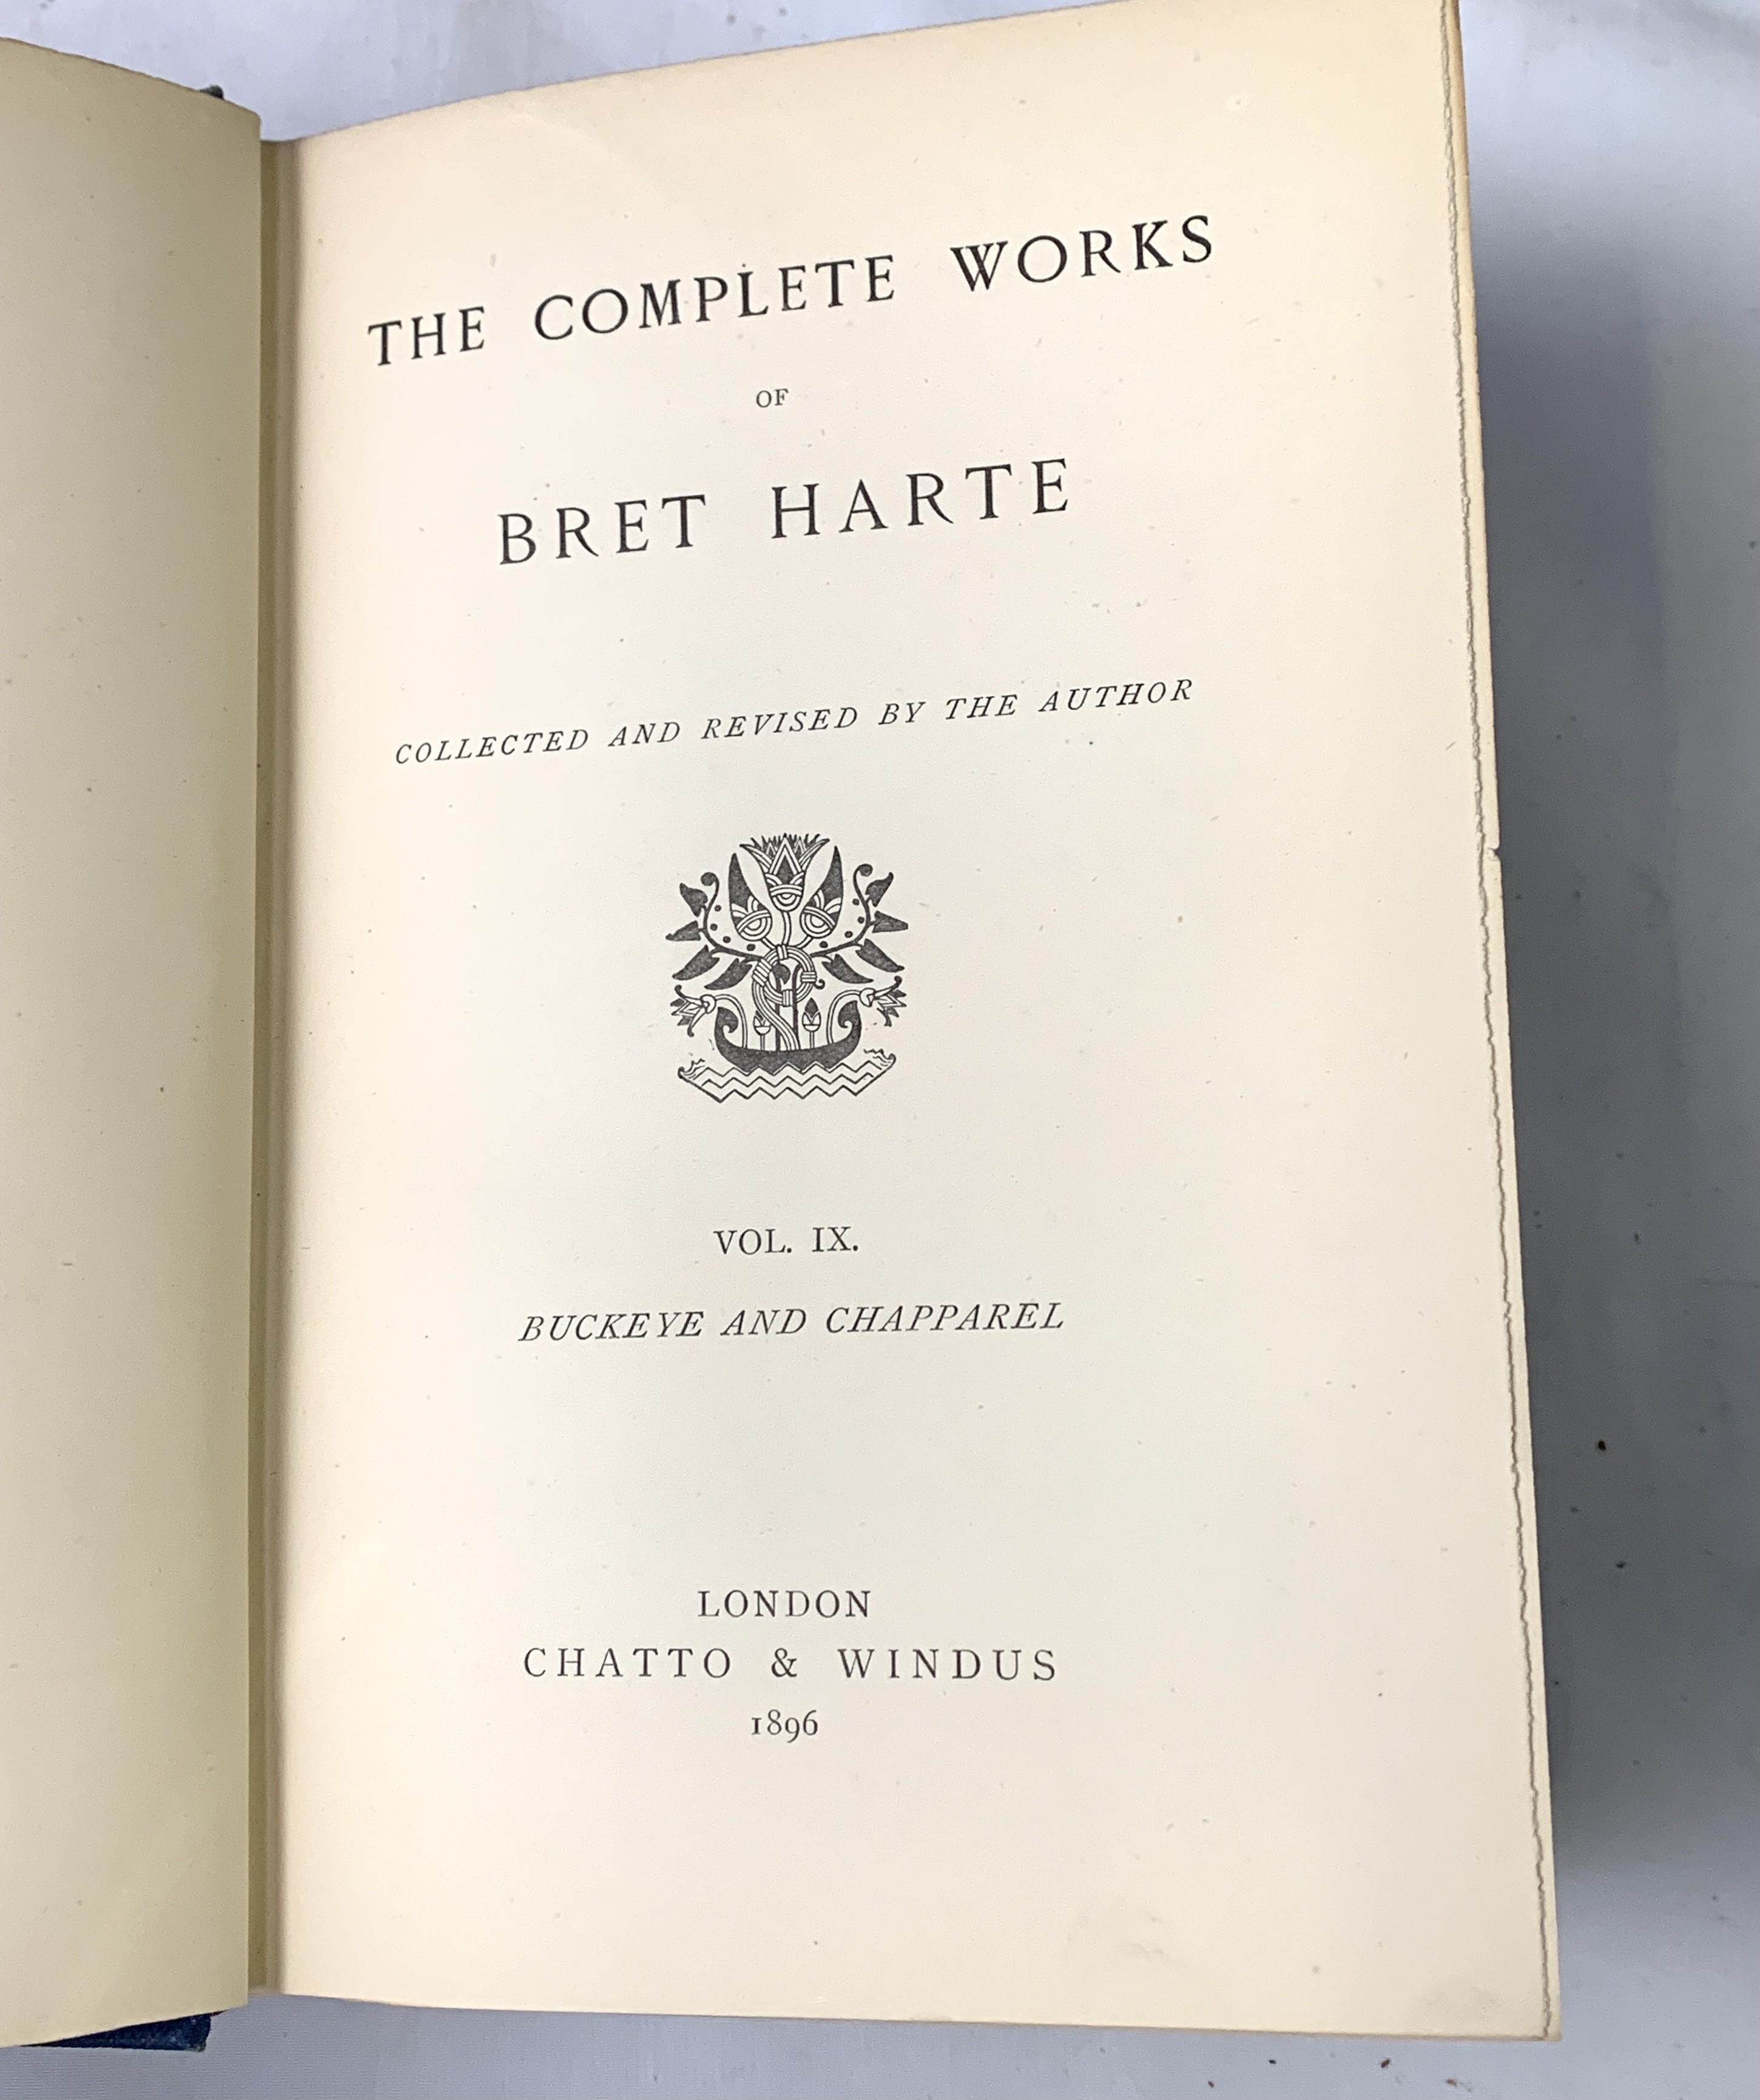 The Works of Bret Harte, published by Chatto and Windus, cloth bound, ten volumes - Image 3 of 4